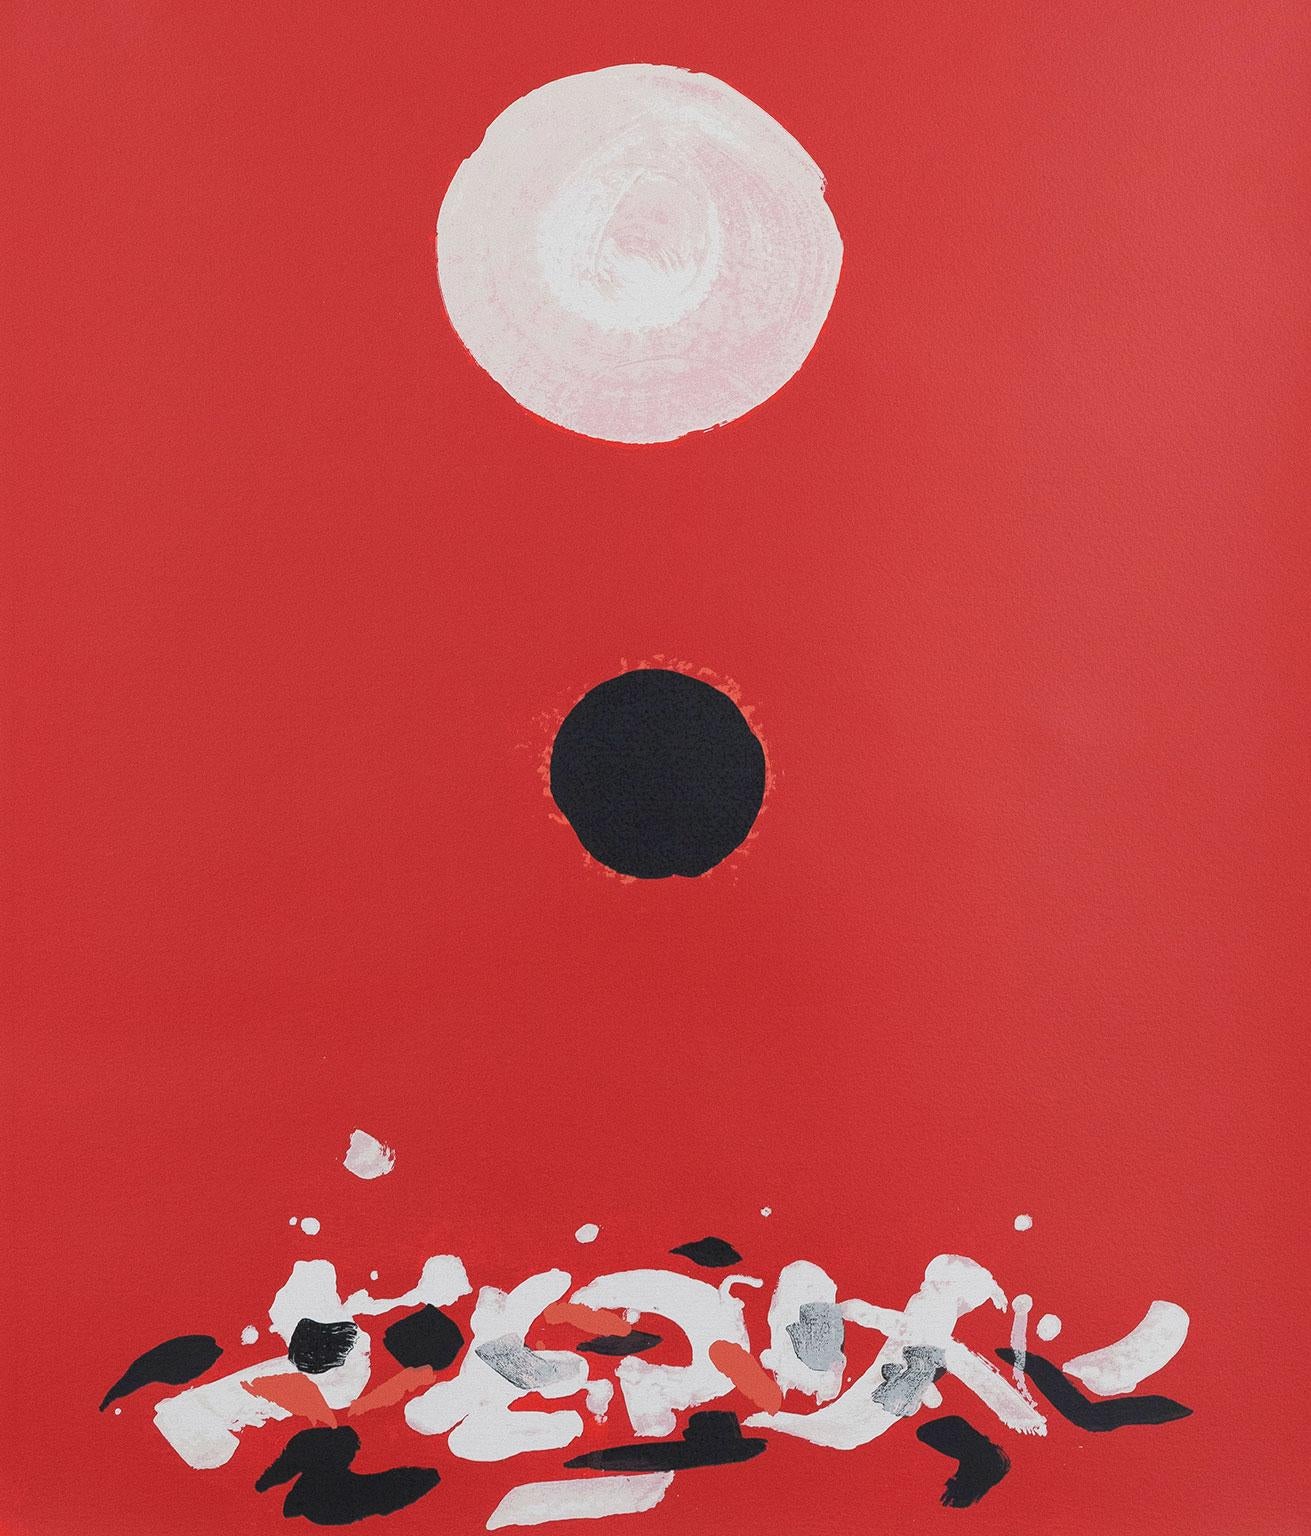 Compared with his peers, the original Abstract Expressionist posse (Arshile Gorky, Hans Hoffmann, Jackson Pollock and Mark Rothko) Adolph Gottlieb arguably created the most easily recognizable paintings. 

While in recent years, Adolph Gottlieb has